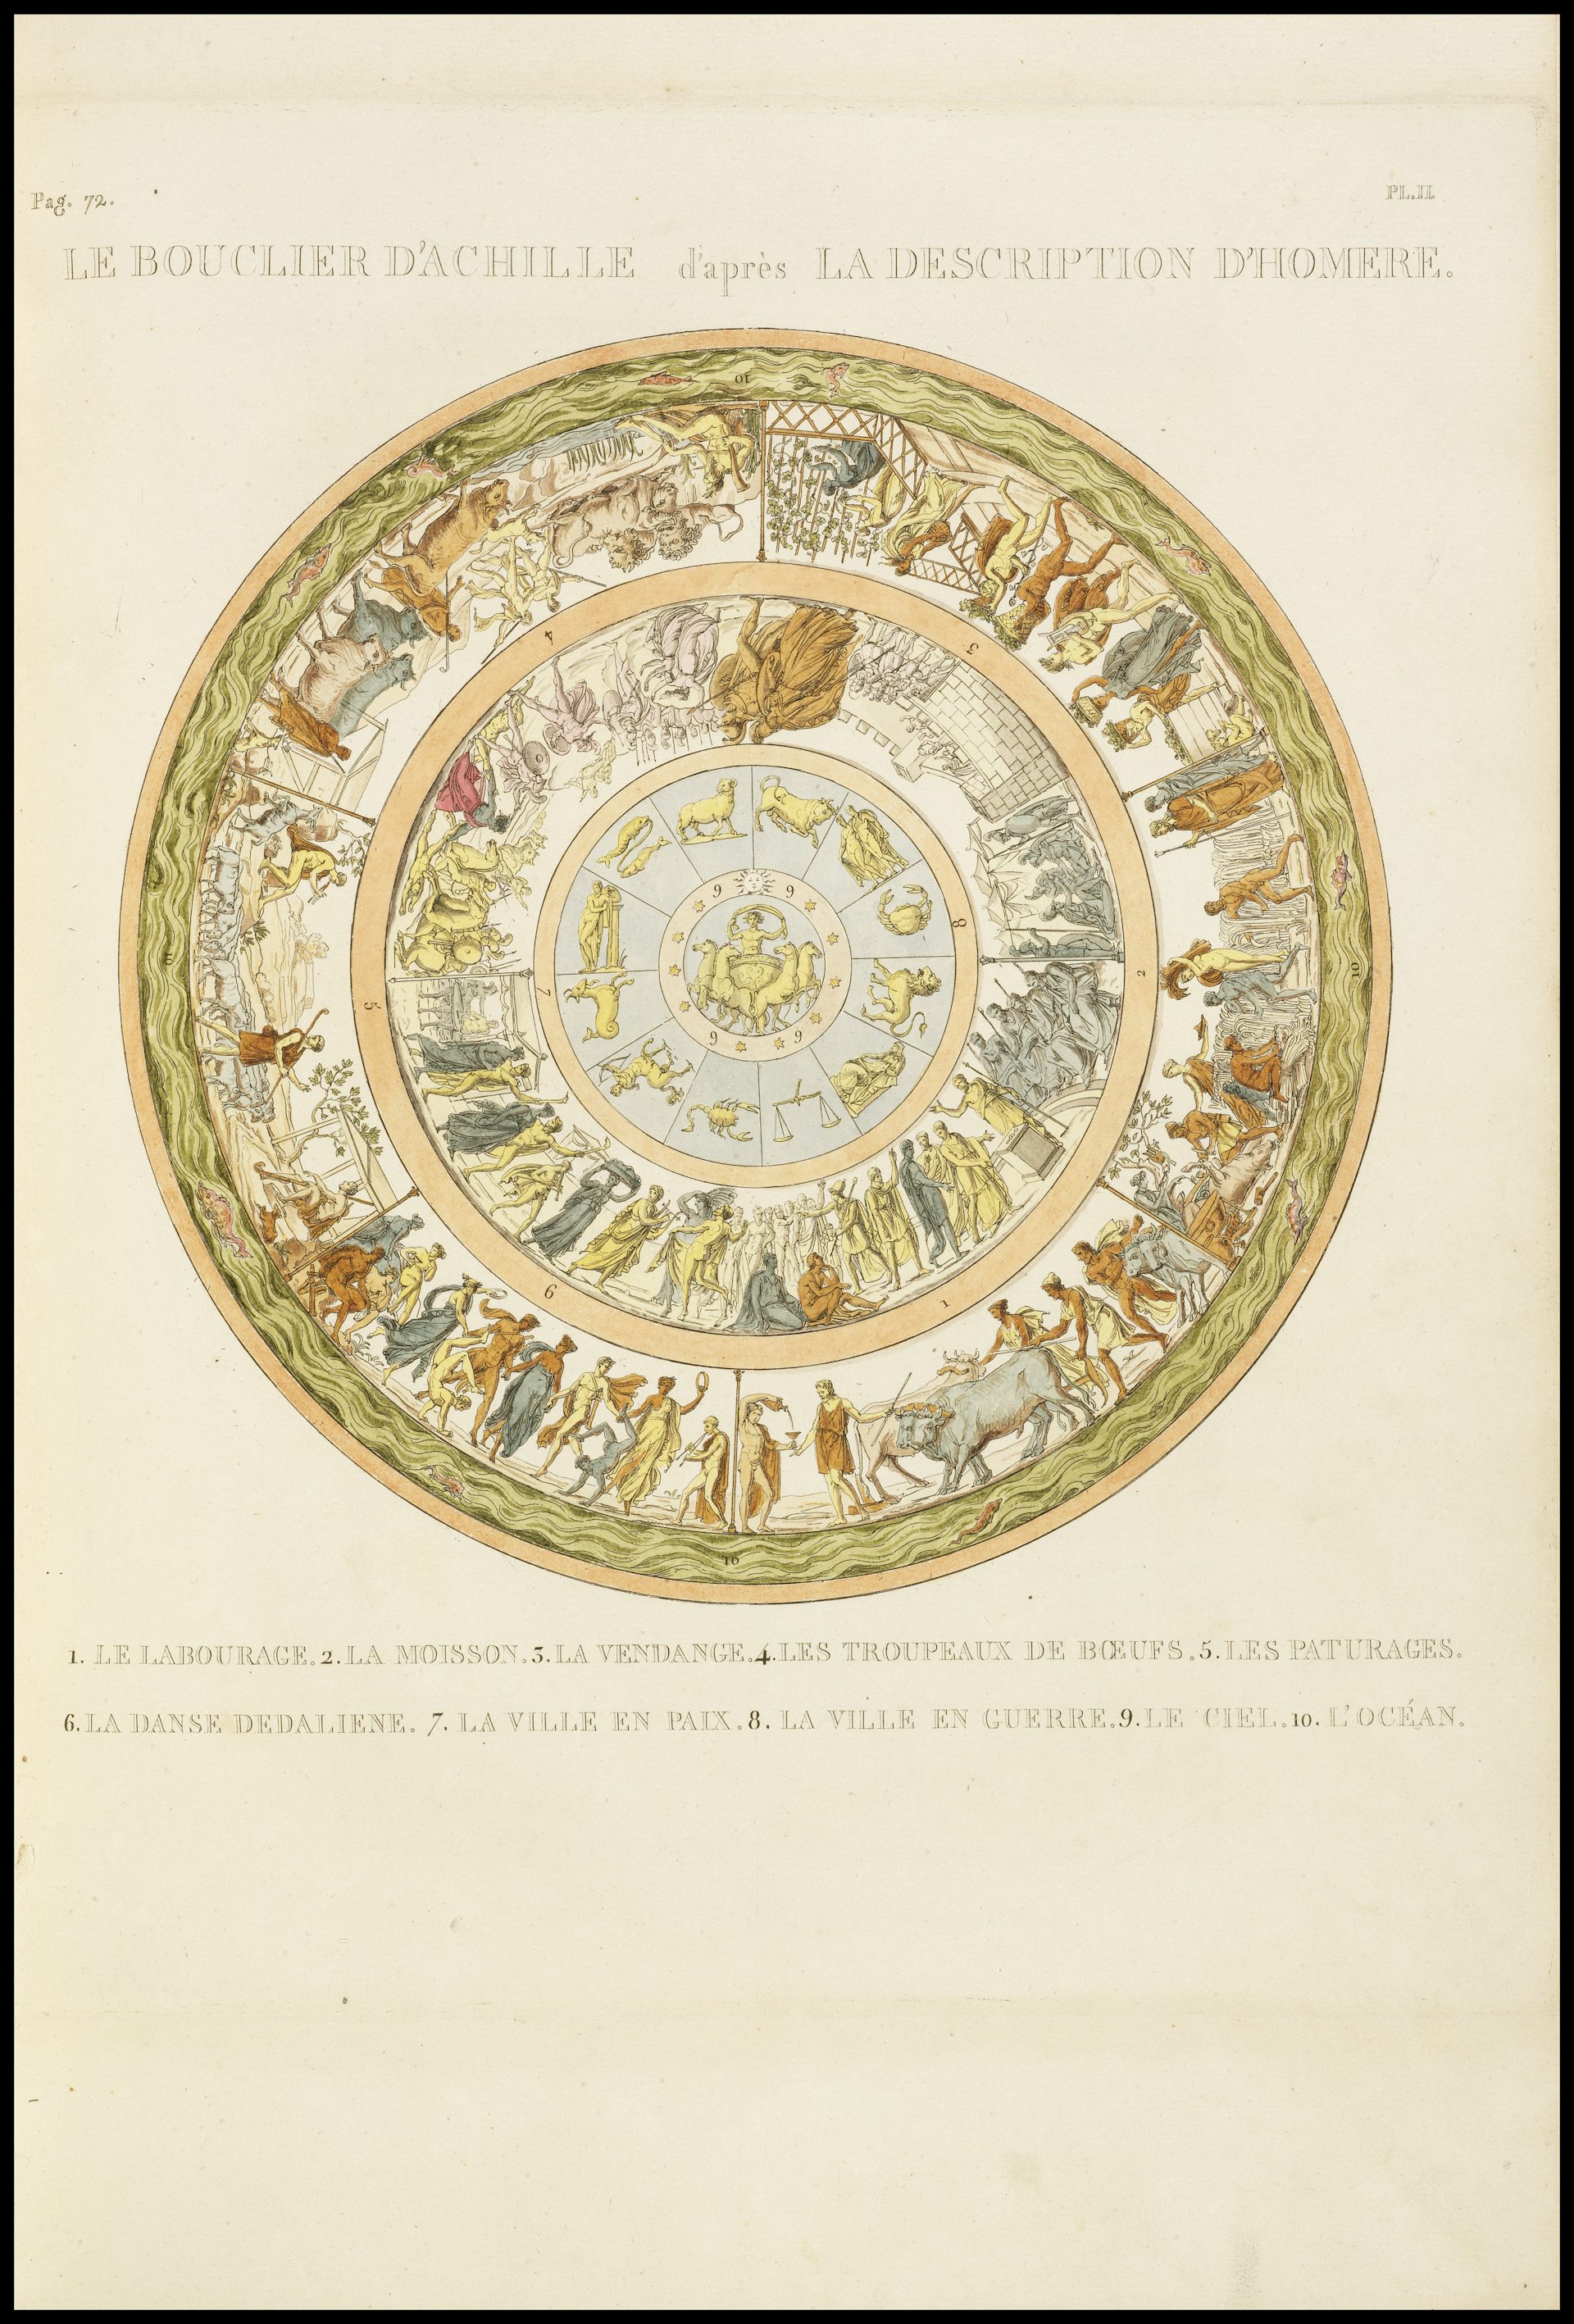 Hand-colored etching of the shield of Achilles by Antoine-Chrysostome Quatremère de Quincy